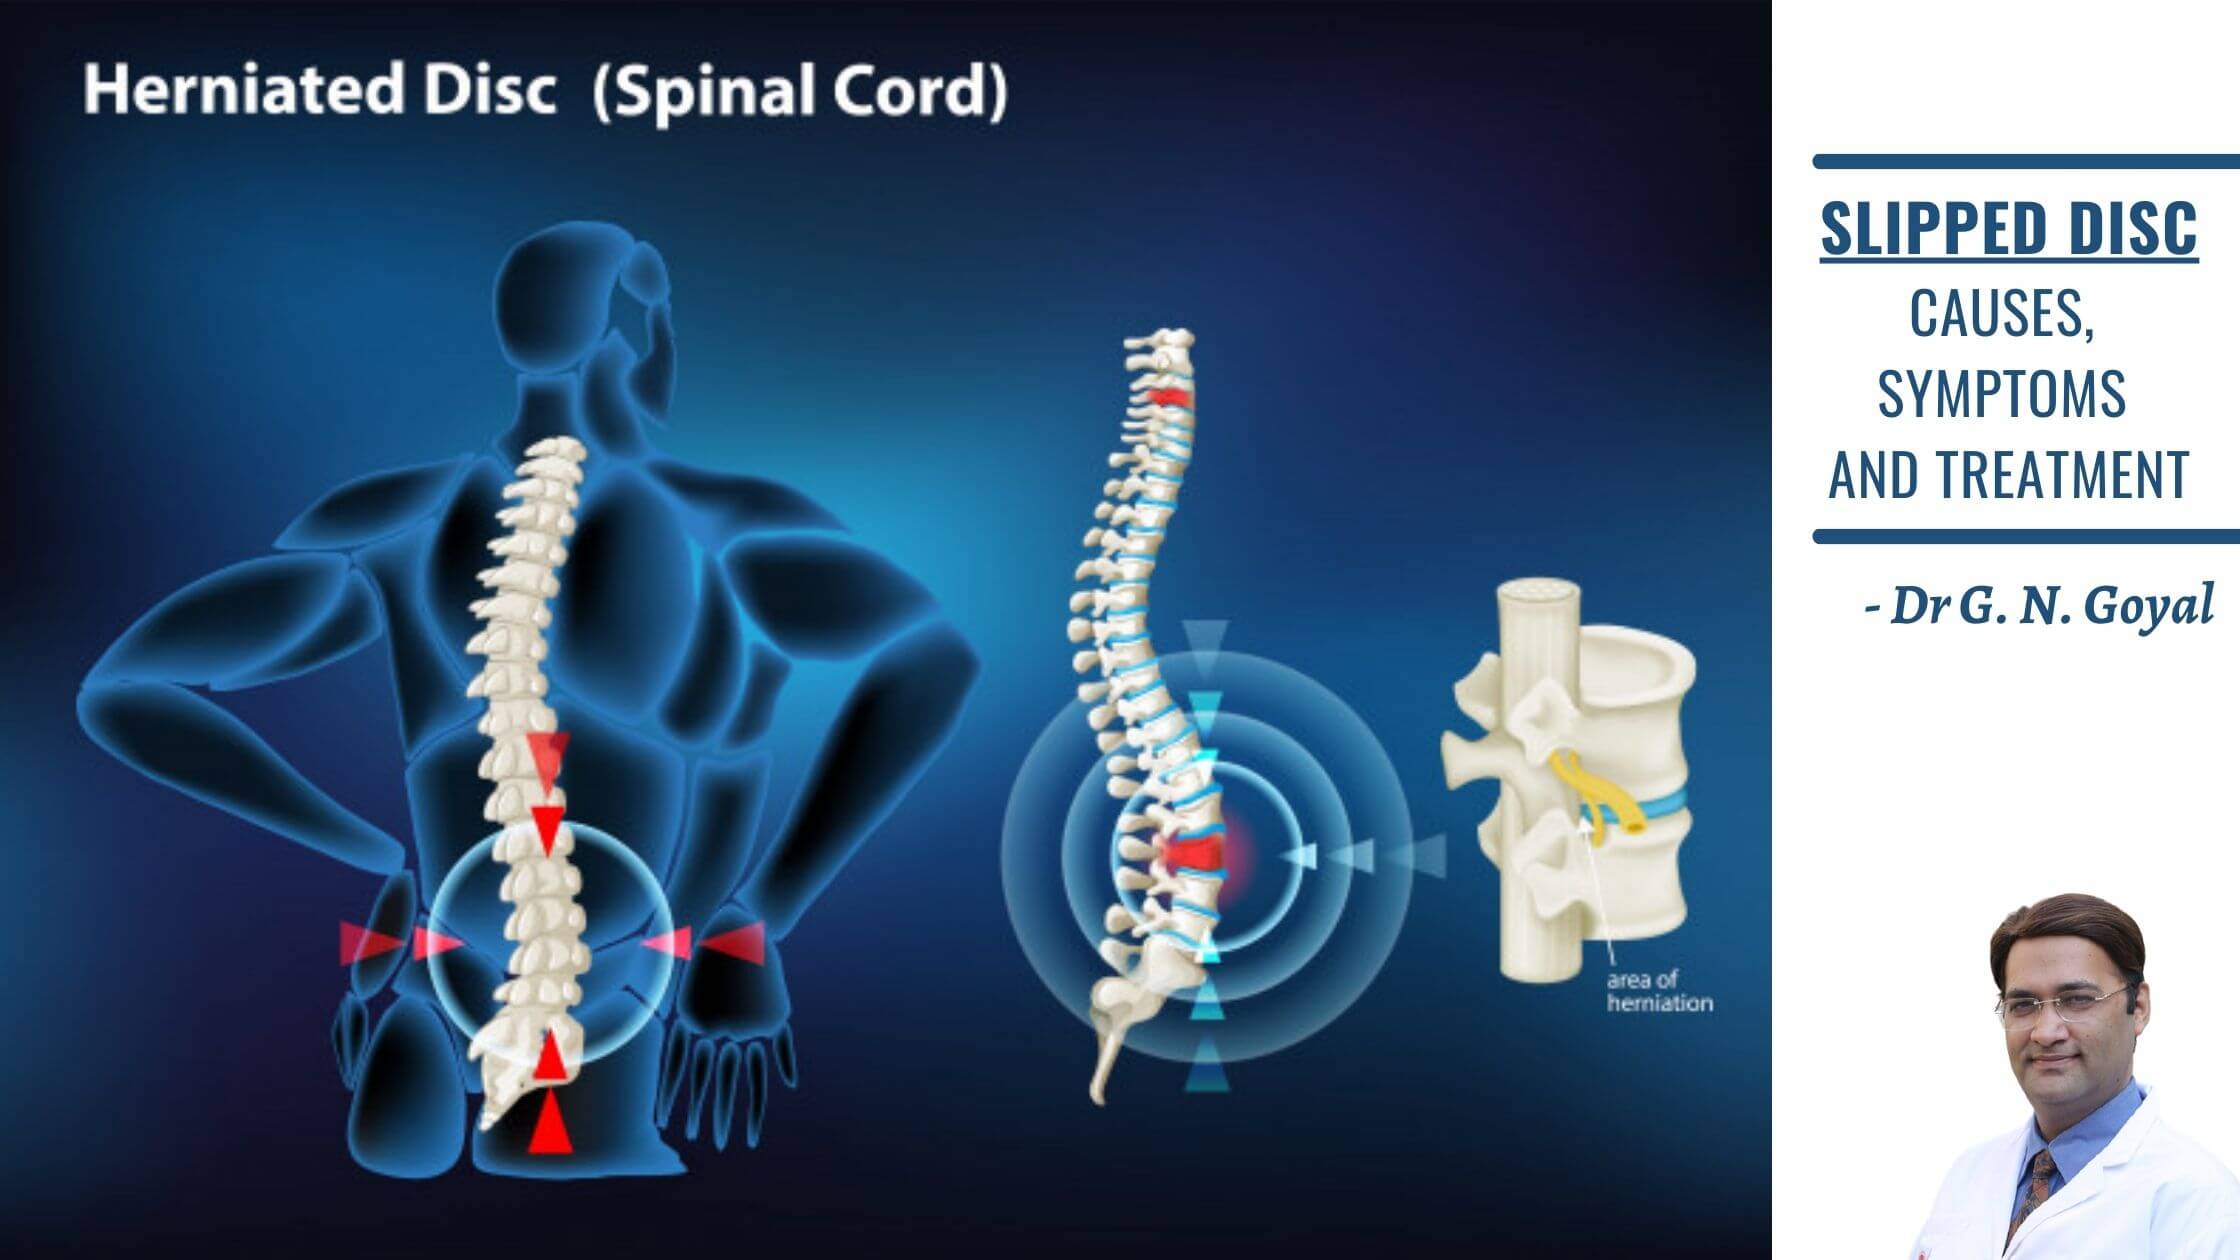 Slipped disc: what is it, symptoms and treatment